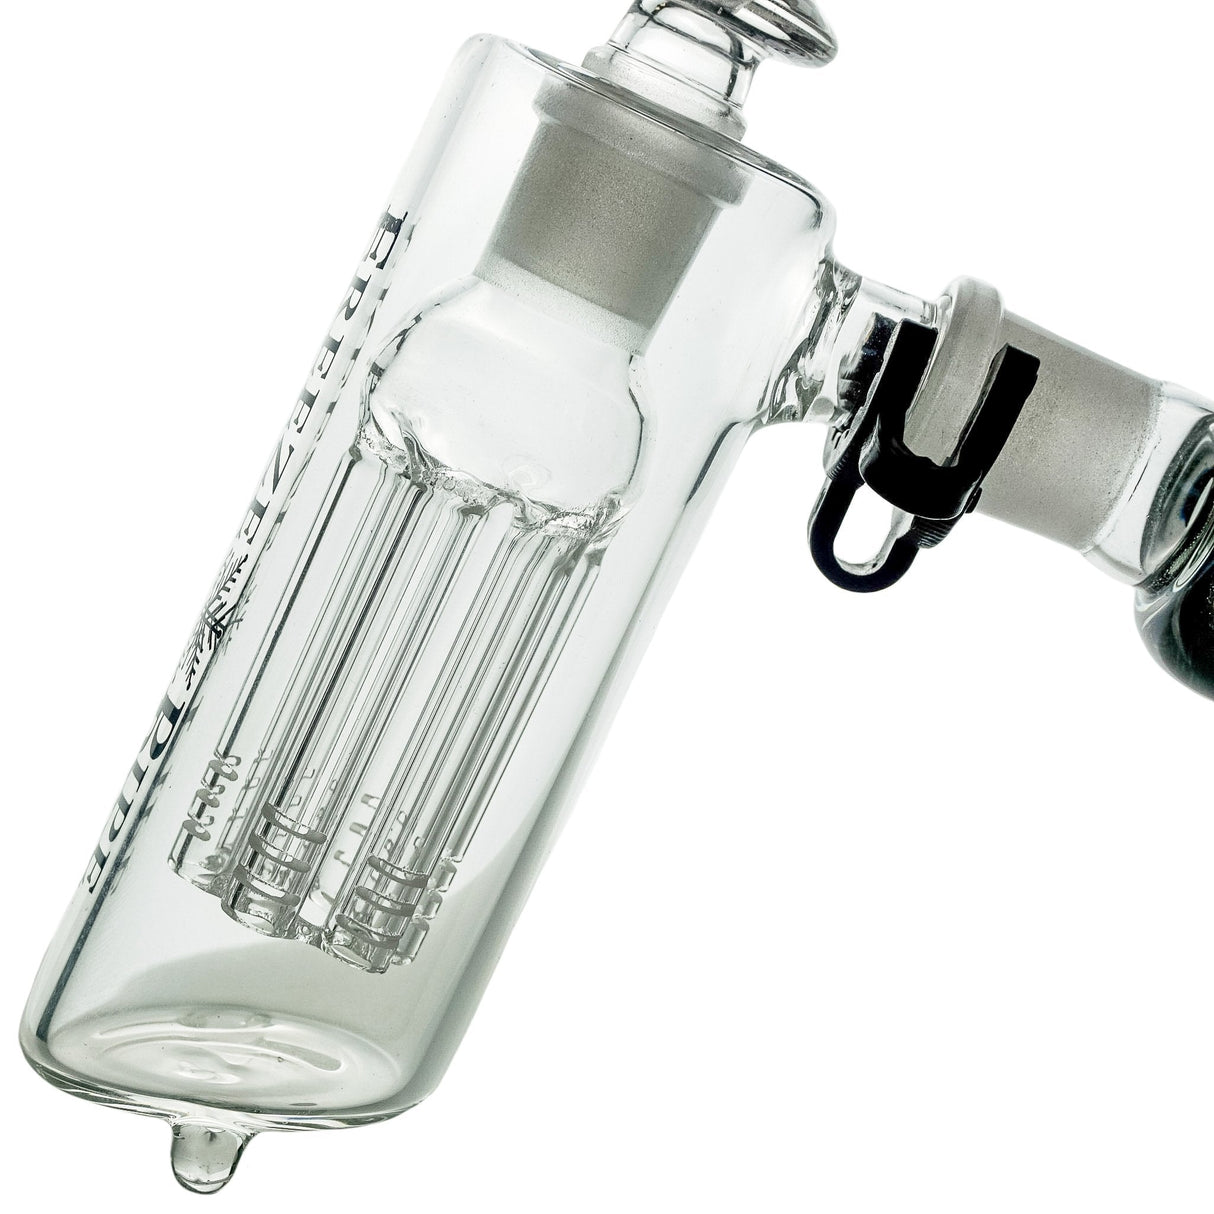 Freeze Pipe Bubbler with Tree Percolator and 18-19mm Joint Size, Angled Side View